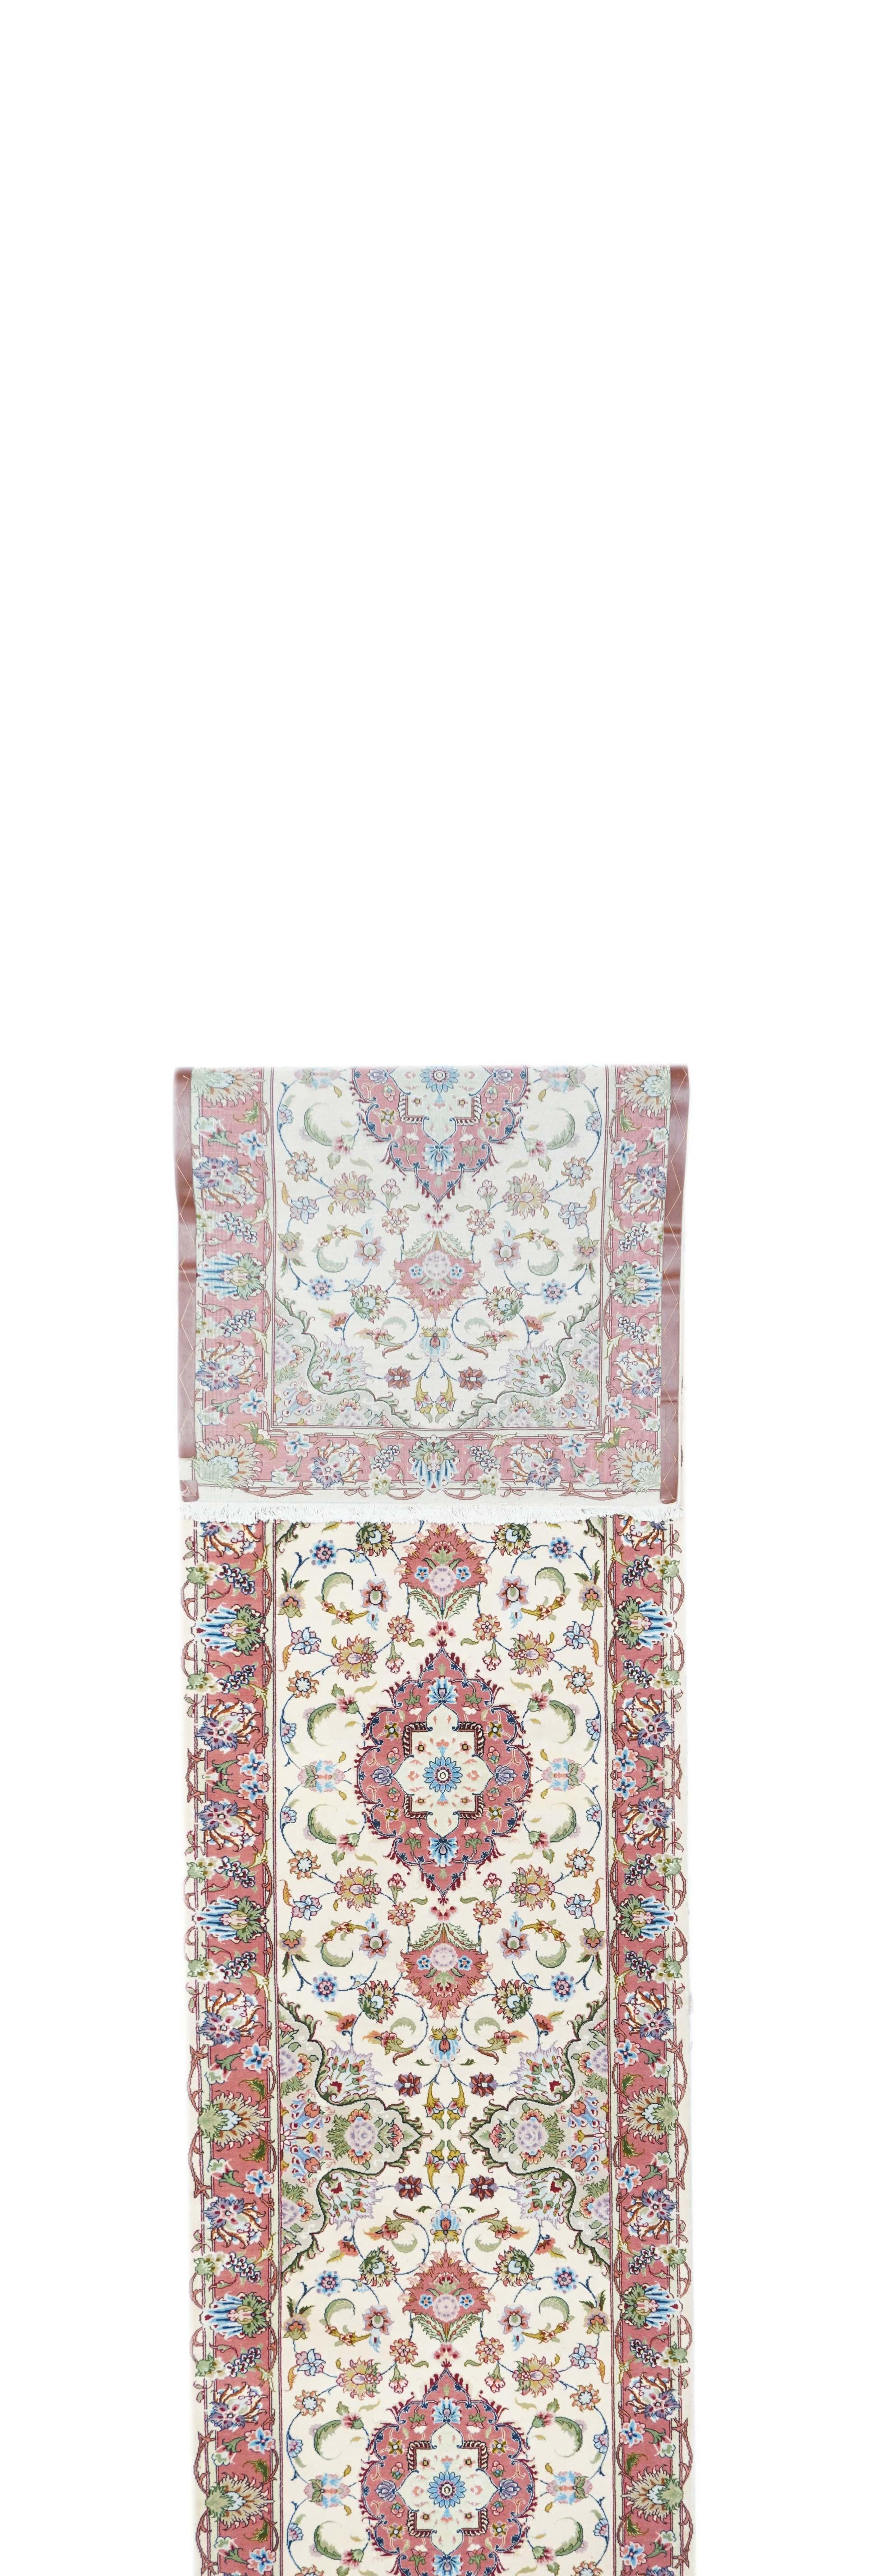 Vintage Tabriz runner 2'9'' x 12'9''. This extremely fine, modern Kenare (runner) shows a cream field in three connected reserves with ragged lappet rose medallions with floating pendants. Straw half medallion side fillers. Expansive rose border